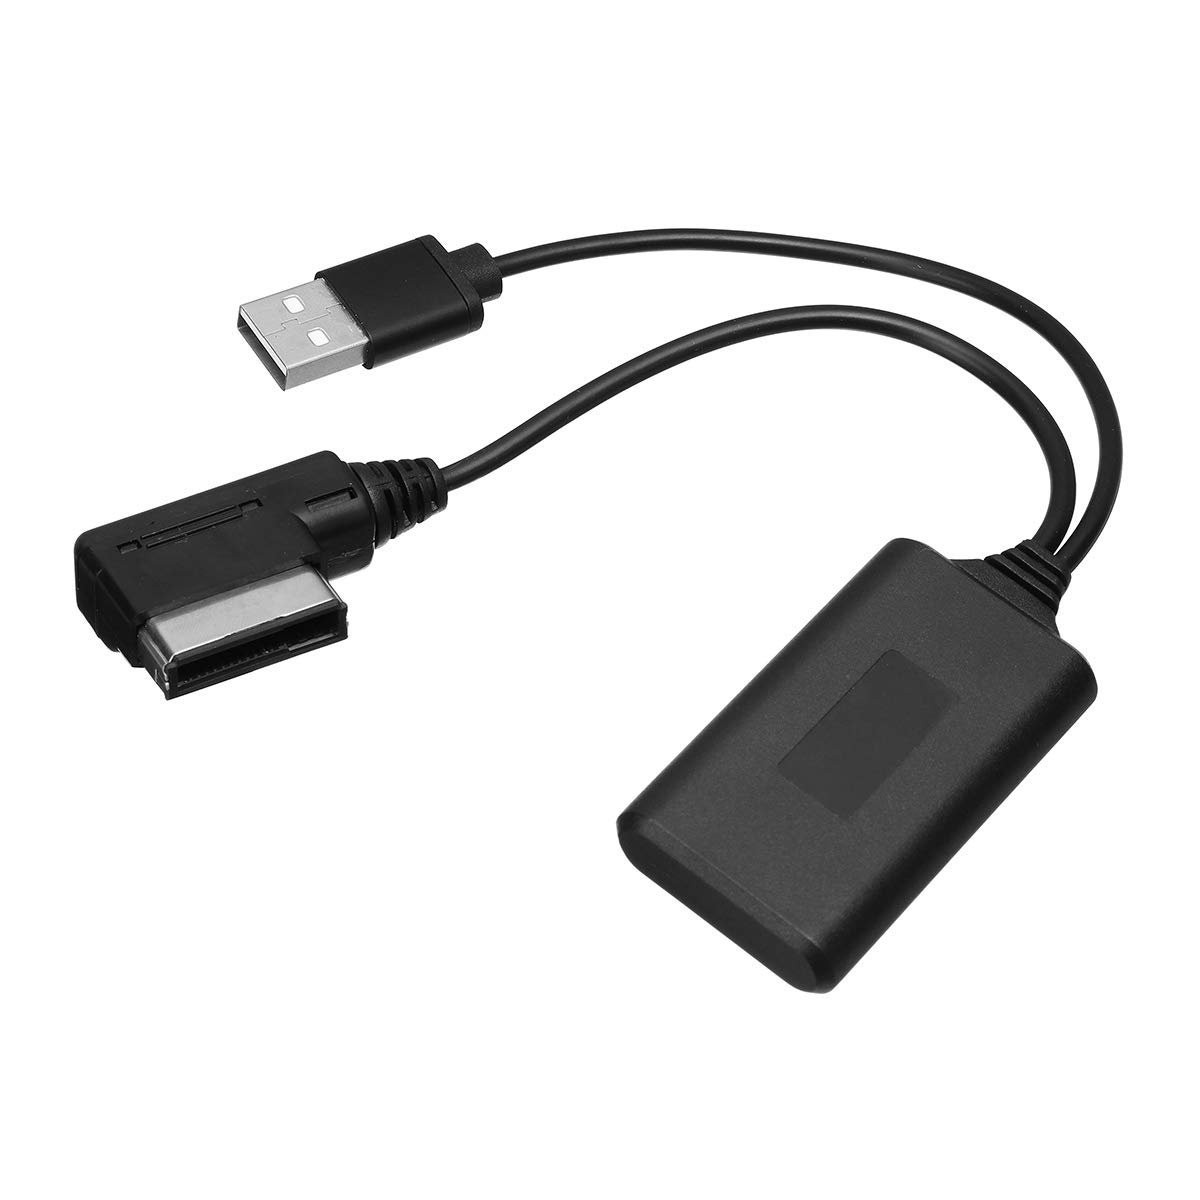 Viviance Bluetooth USB In Adapter Aux Cable kompatibel mit Audi A5 8T A6 4F A8 4E Q7 7L Ami MMI 2G von Viviance